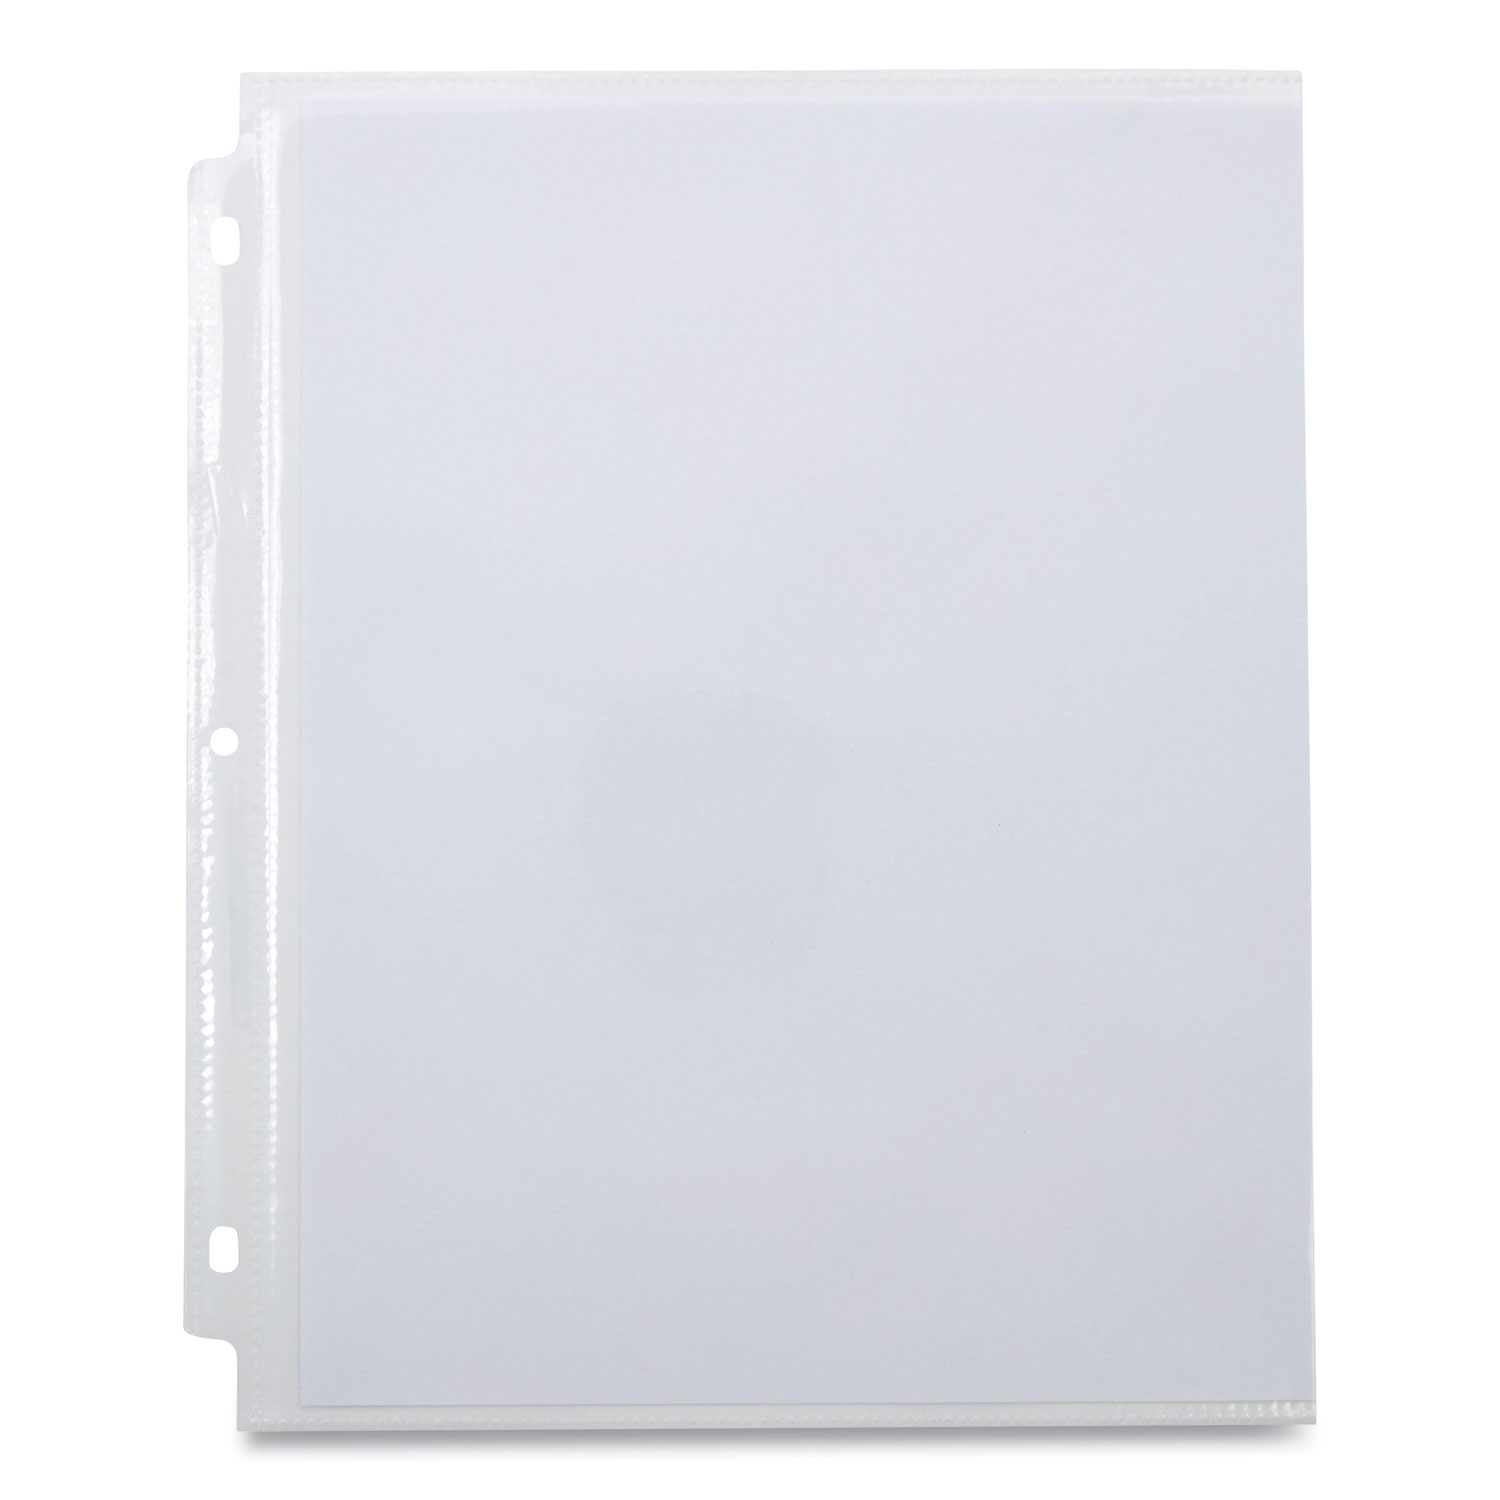  Avery 76001 Side Insert Heavyweight Diamond Clear Sheet Protectors, Letter, 25/Pack (AVE431492) 